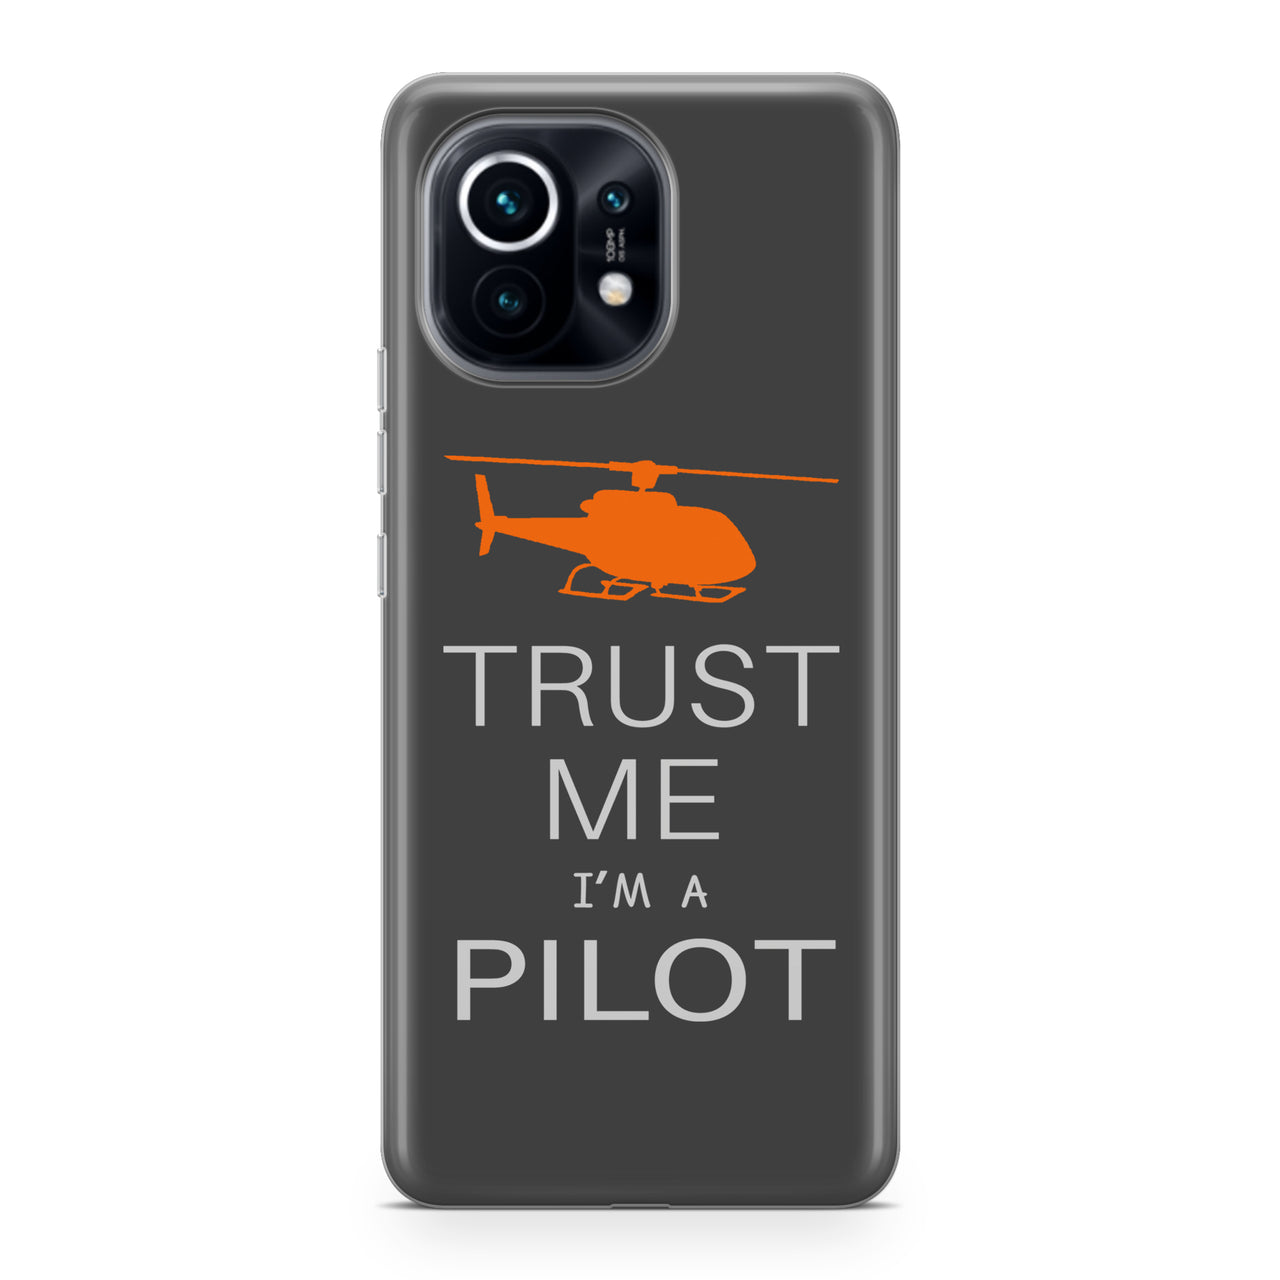 Trust Me I'm a Pilot (Helicopter) Designed Xiaomi Cases